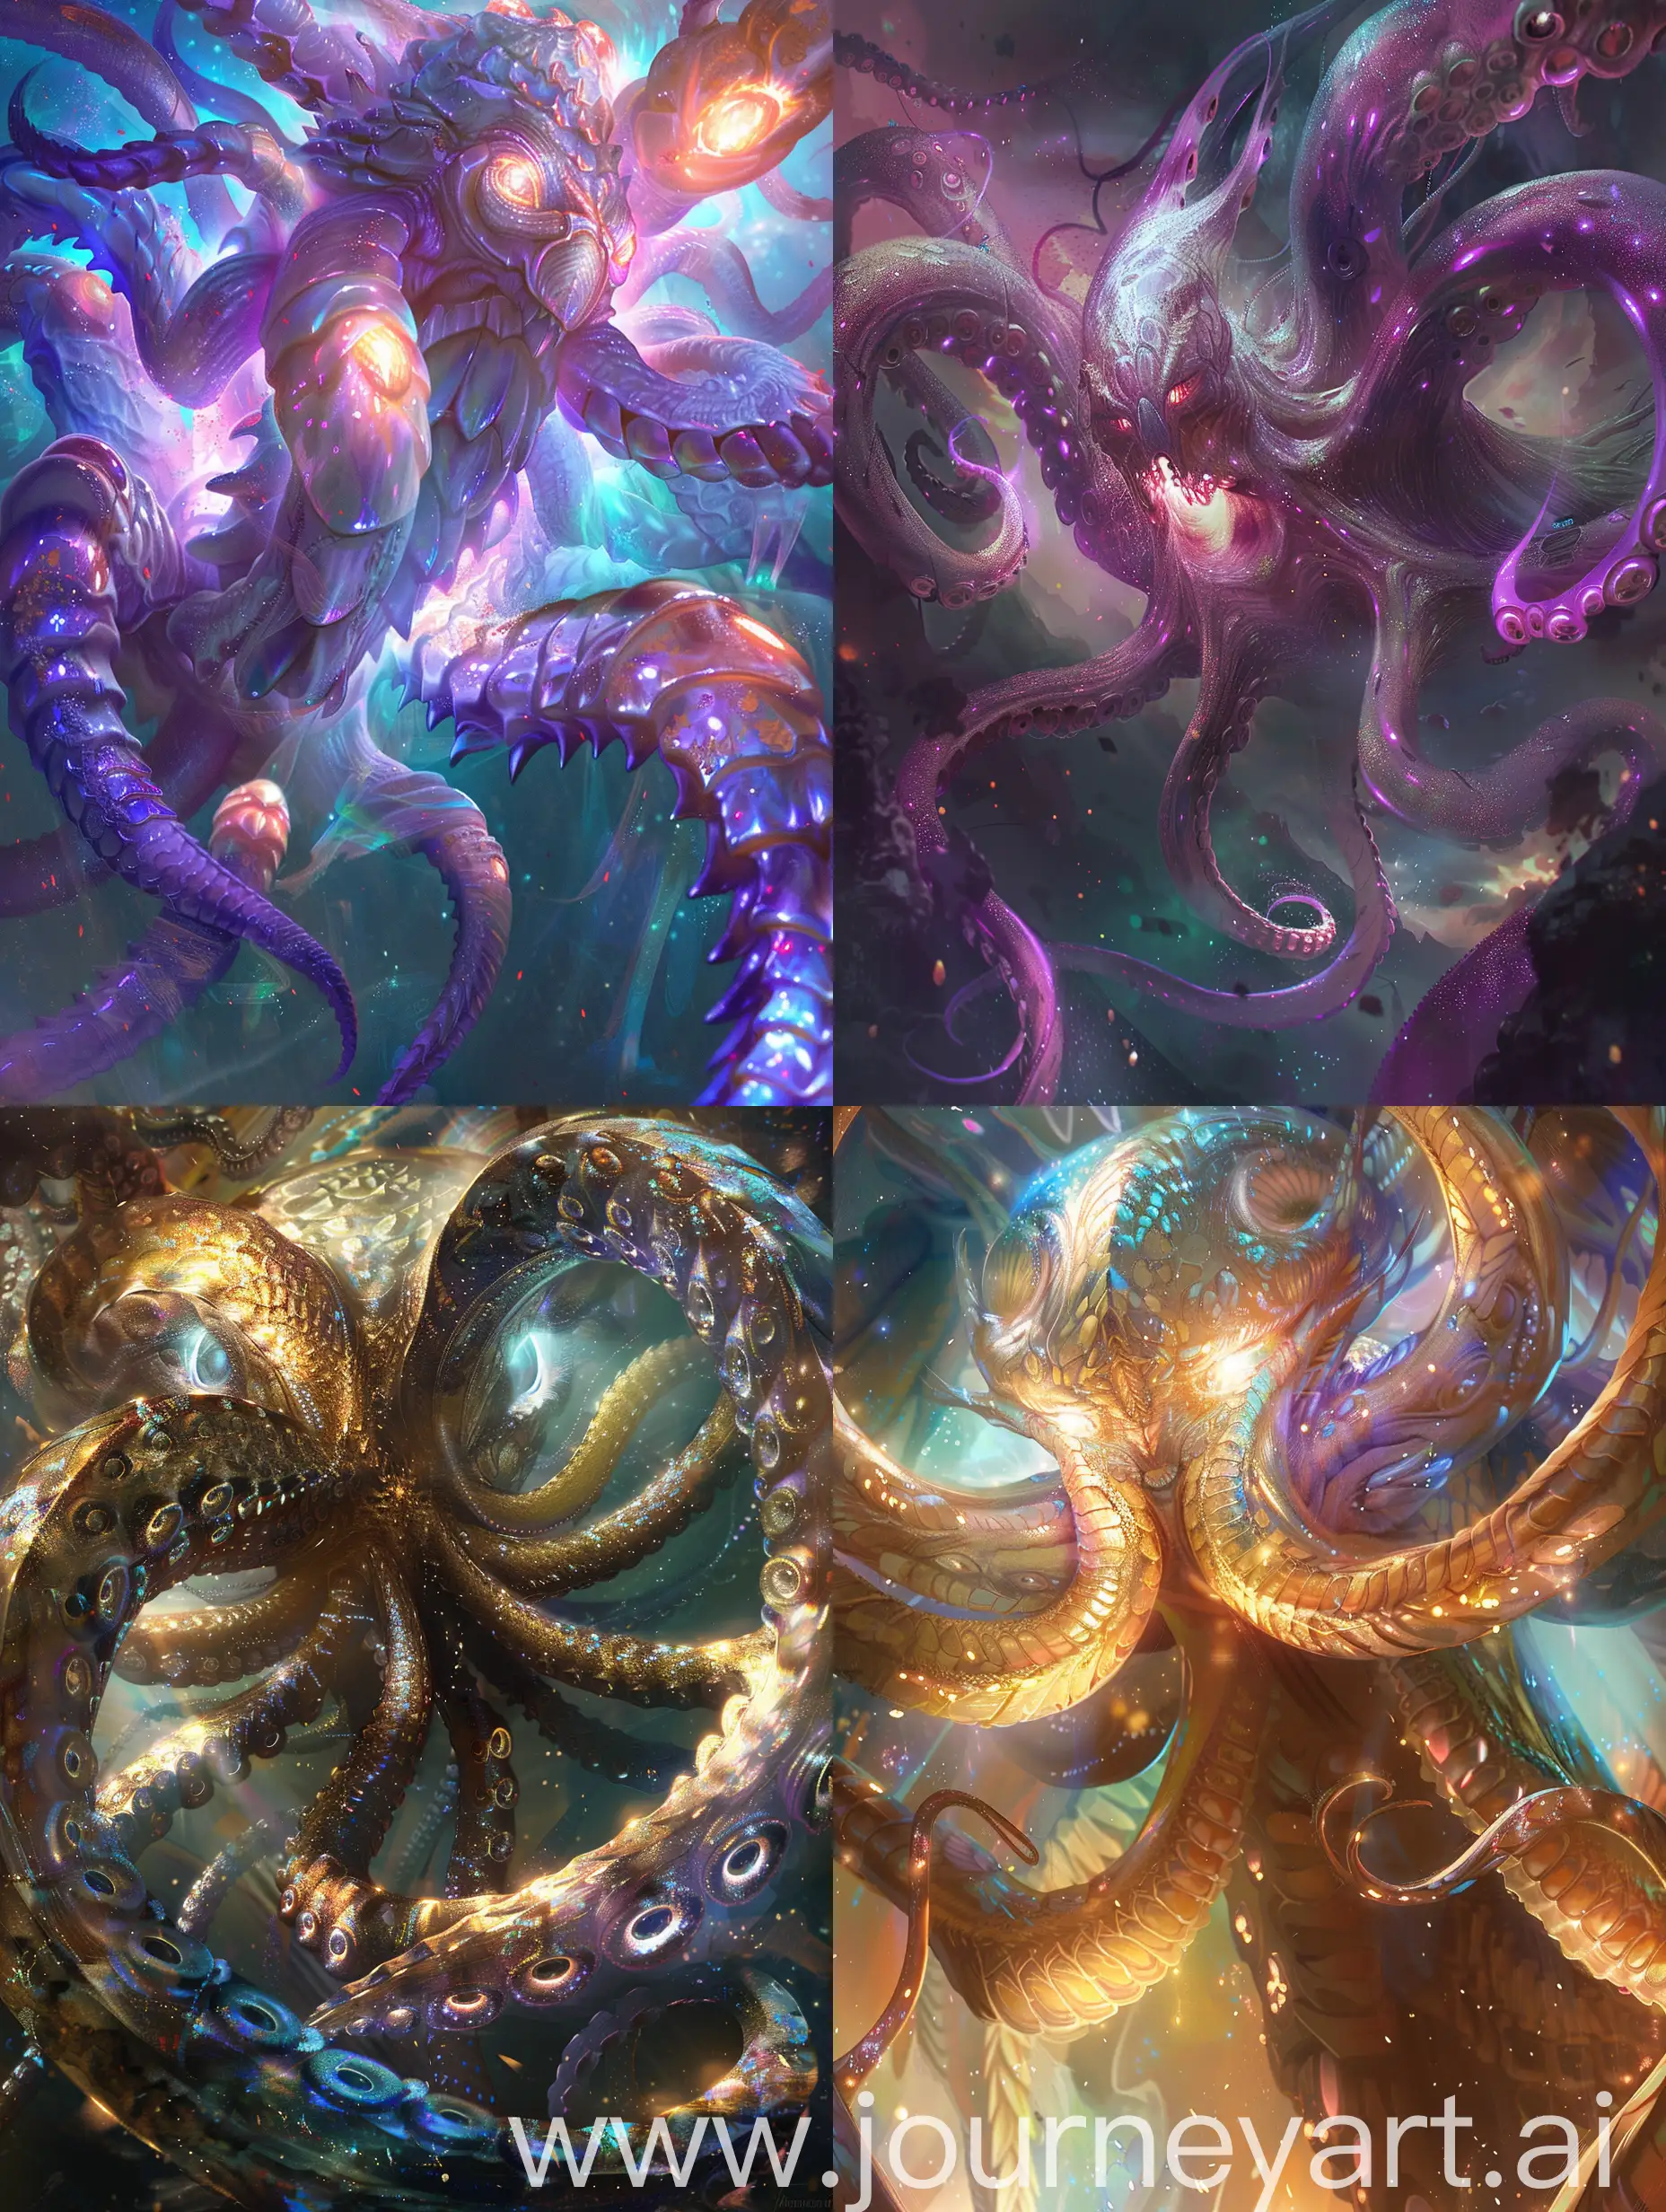 Enchanting-Otherworldly-Titan-with-Iridescent-Scales-and-Hypnotic-Tentacles